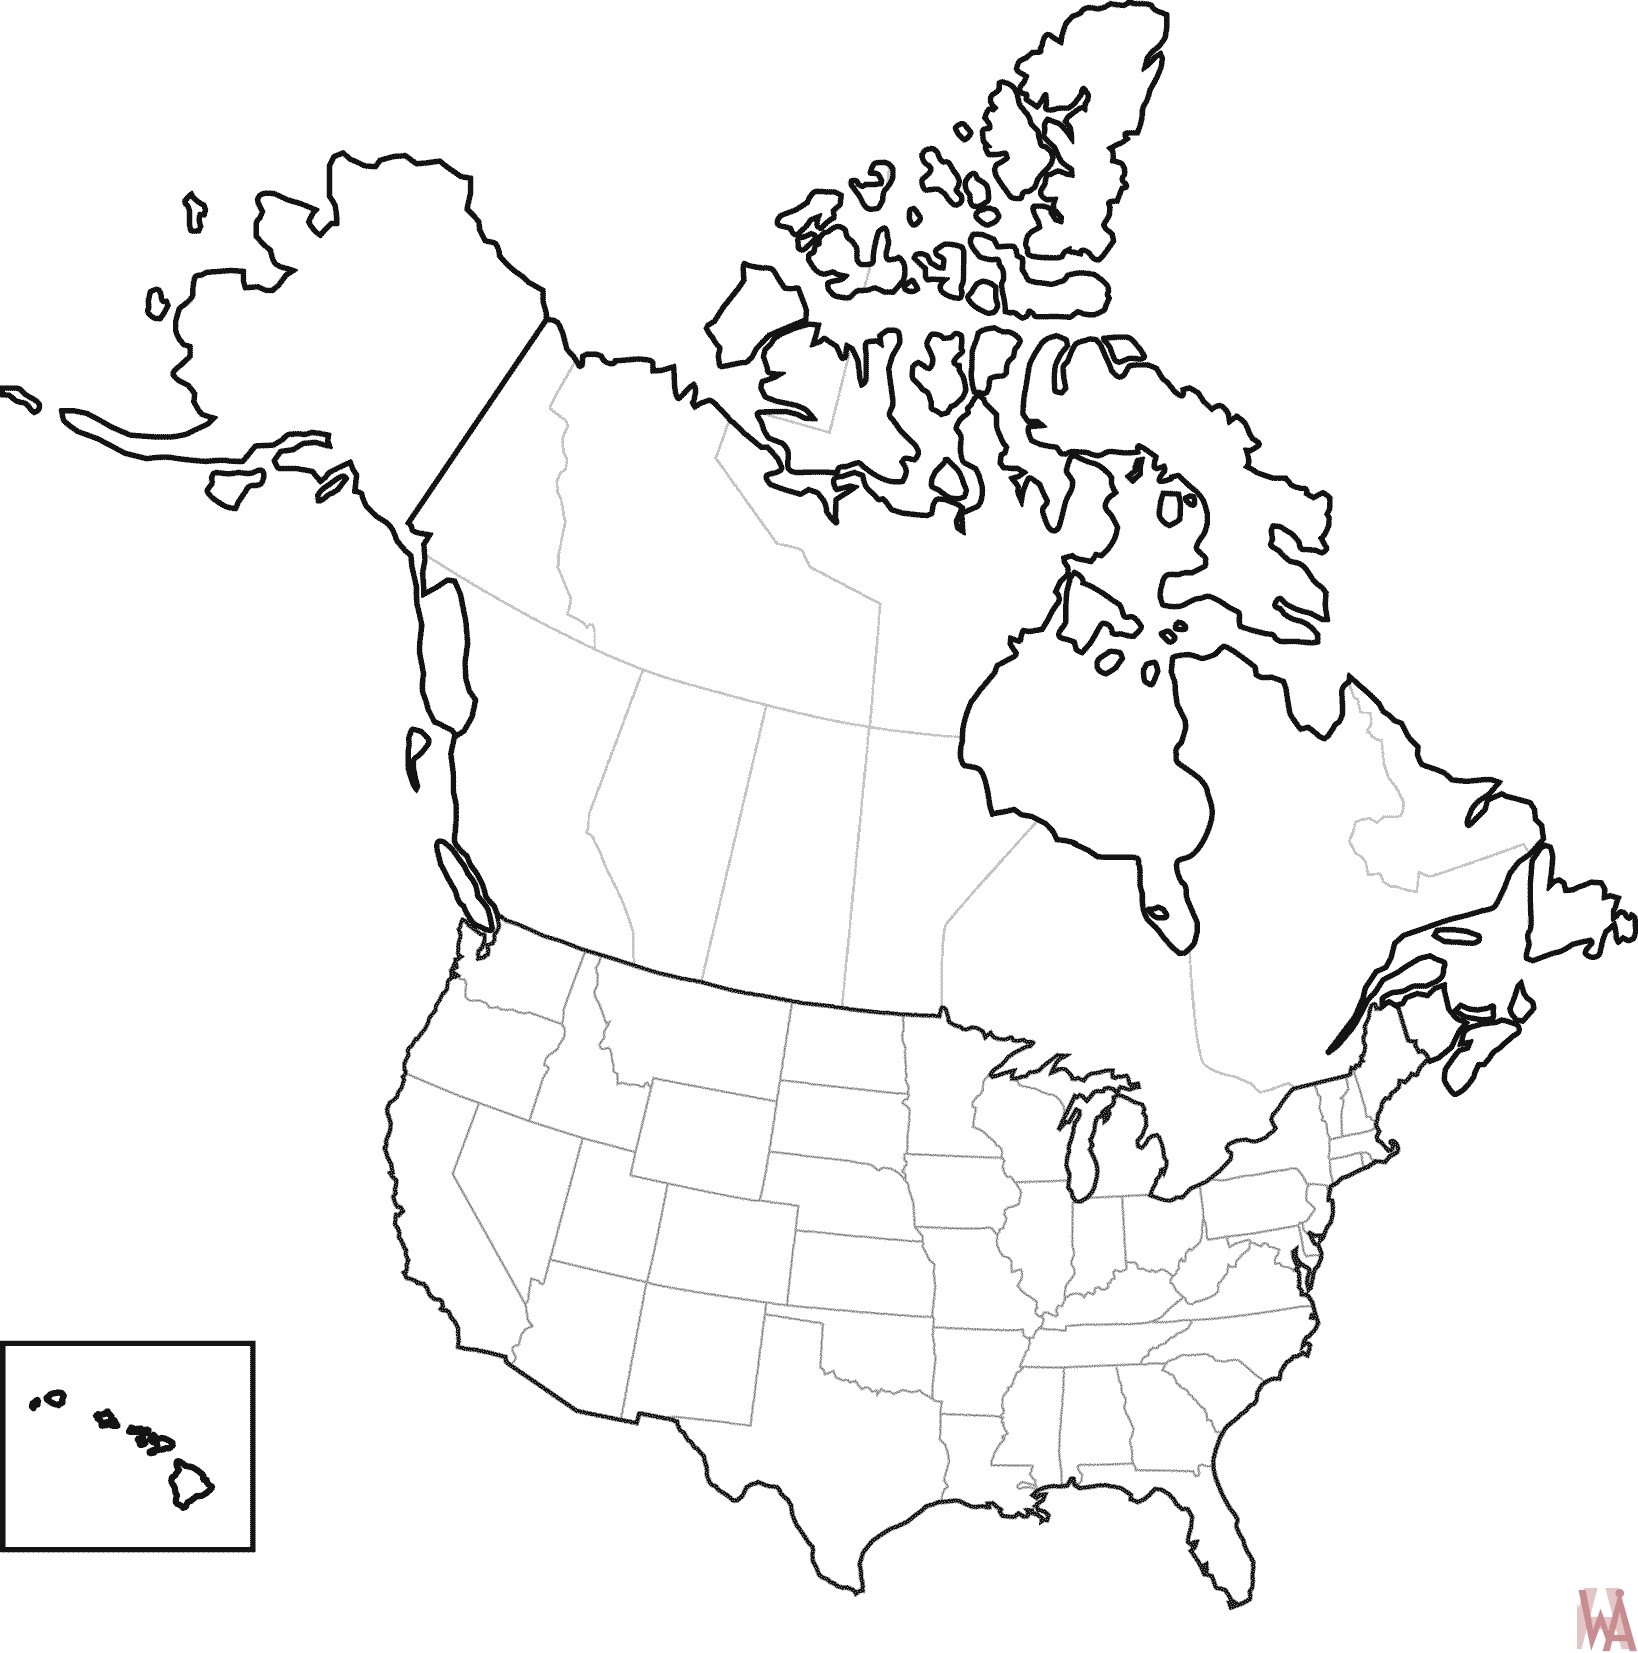 Plain Map Of The United States Blank Outline Map of the United States And Canada | WhatsAnswer